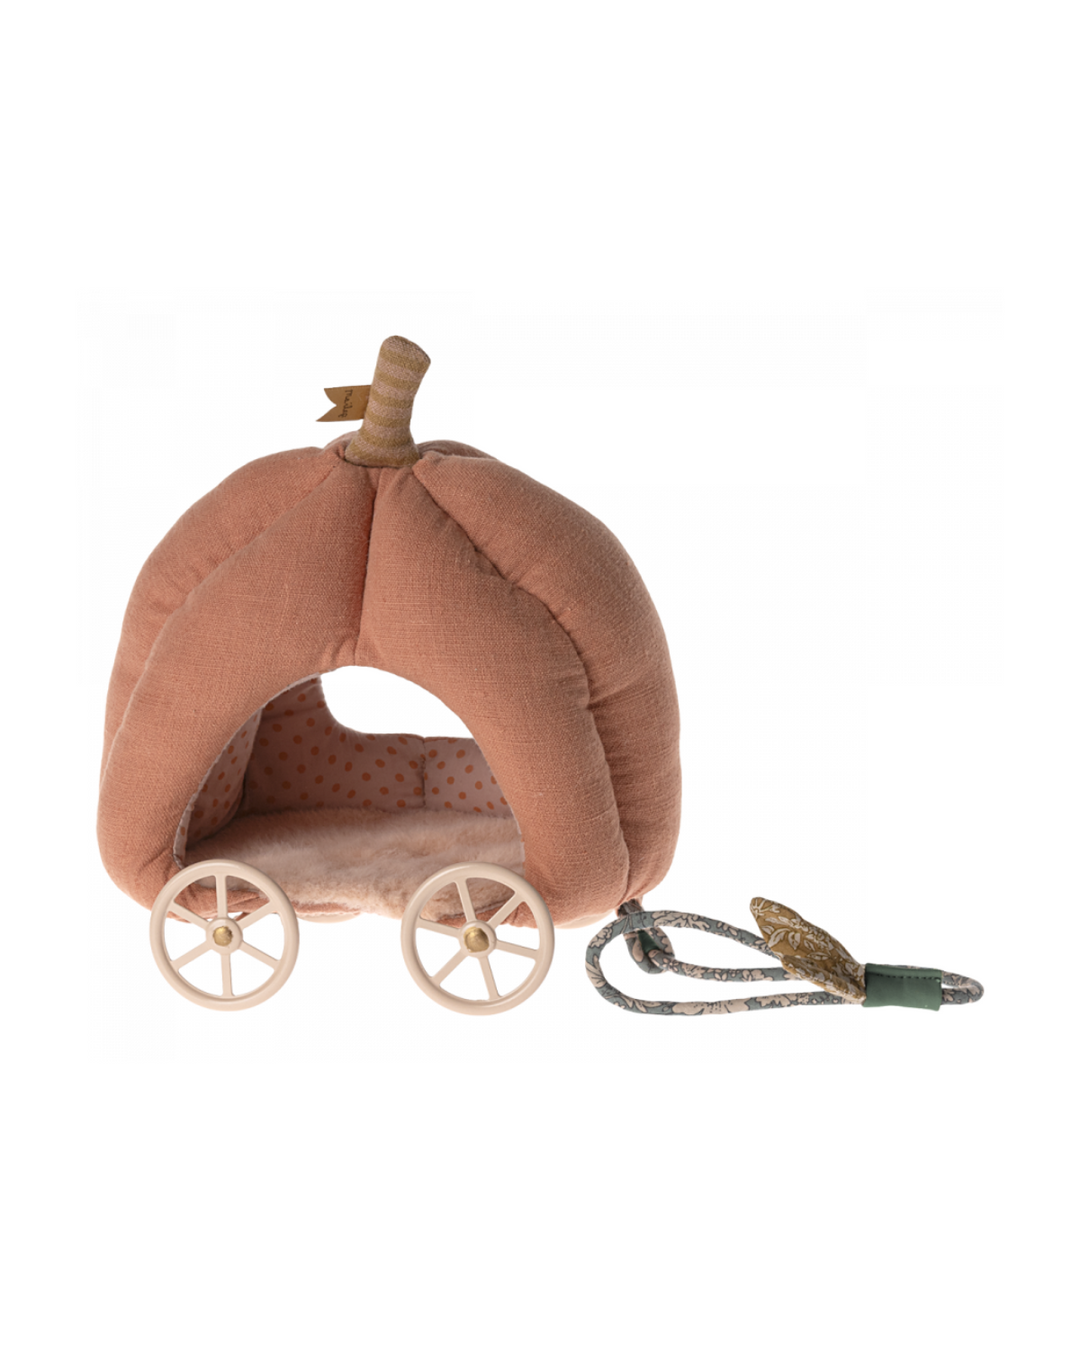 Maileg Mouse Pumpkin Carriage: Charming Dollhouse Accessory